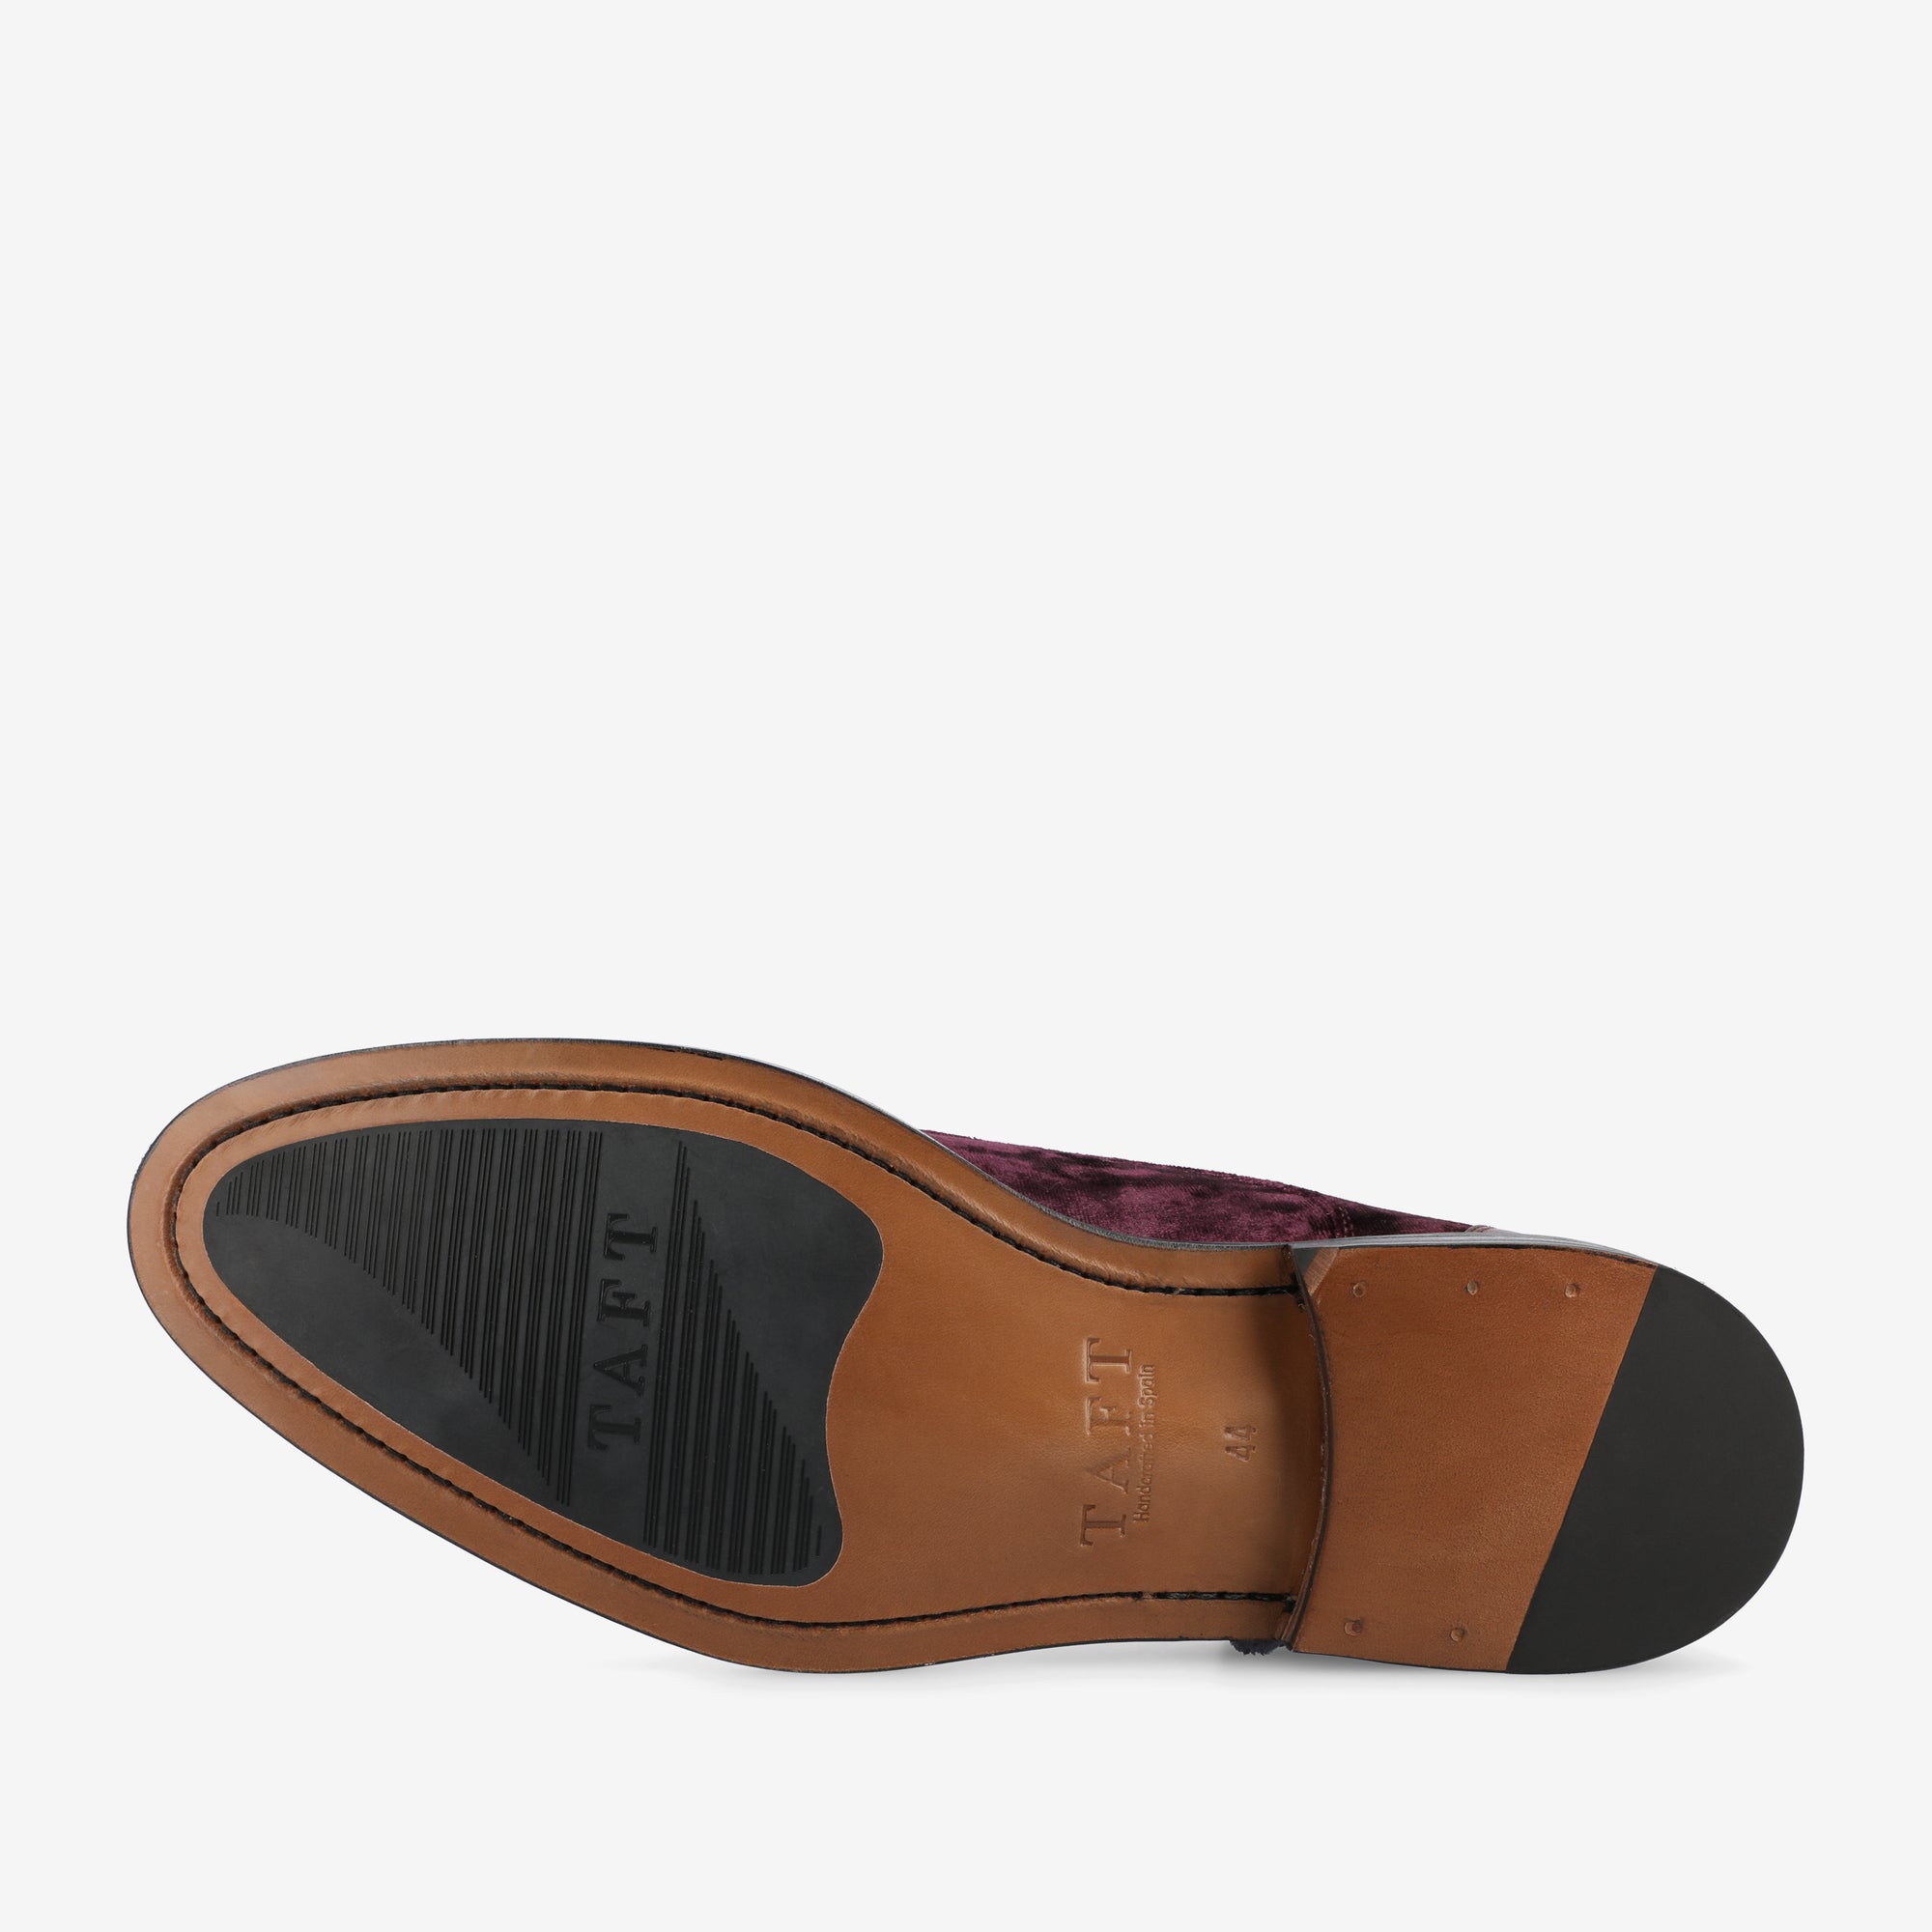 The Jack Shoe in Pinot (Last Chance, Final Sale)